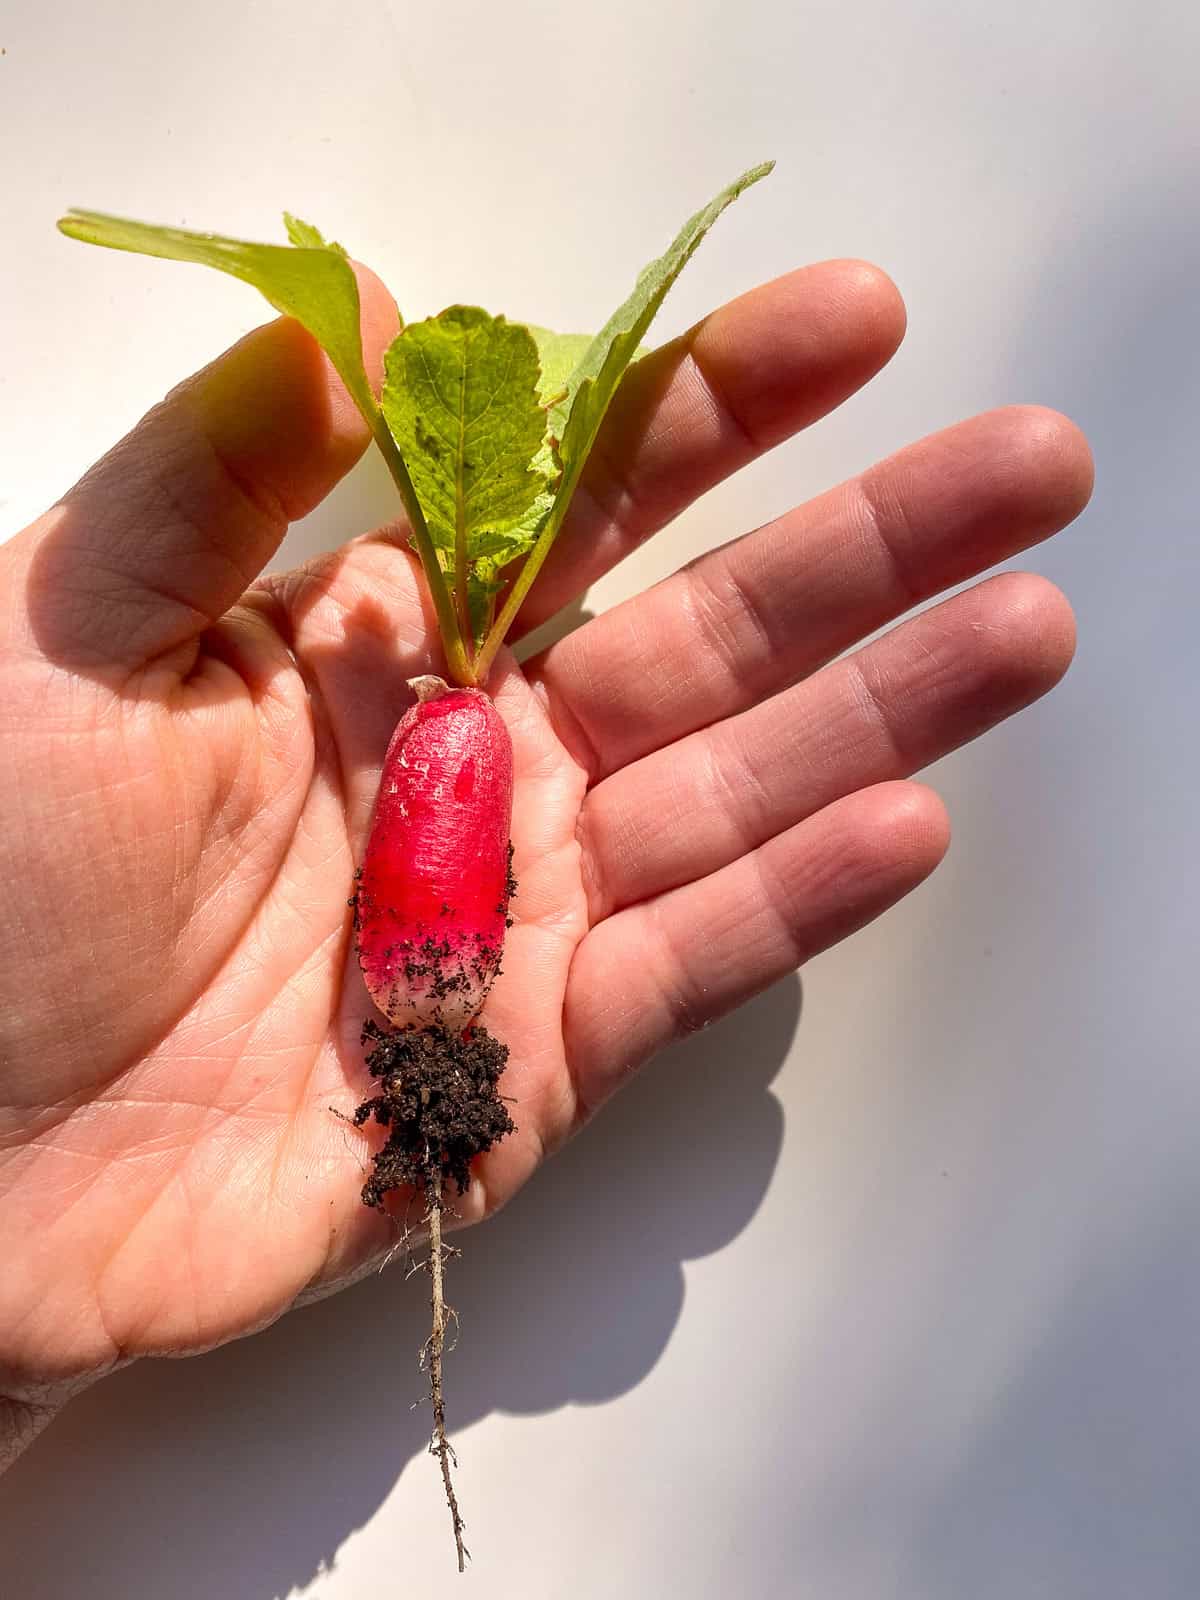 An image of a hand holding a small french breakfast radishes.